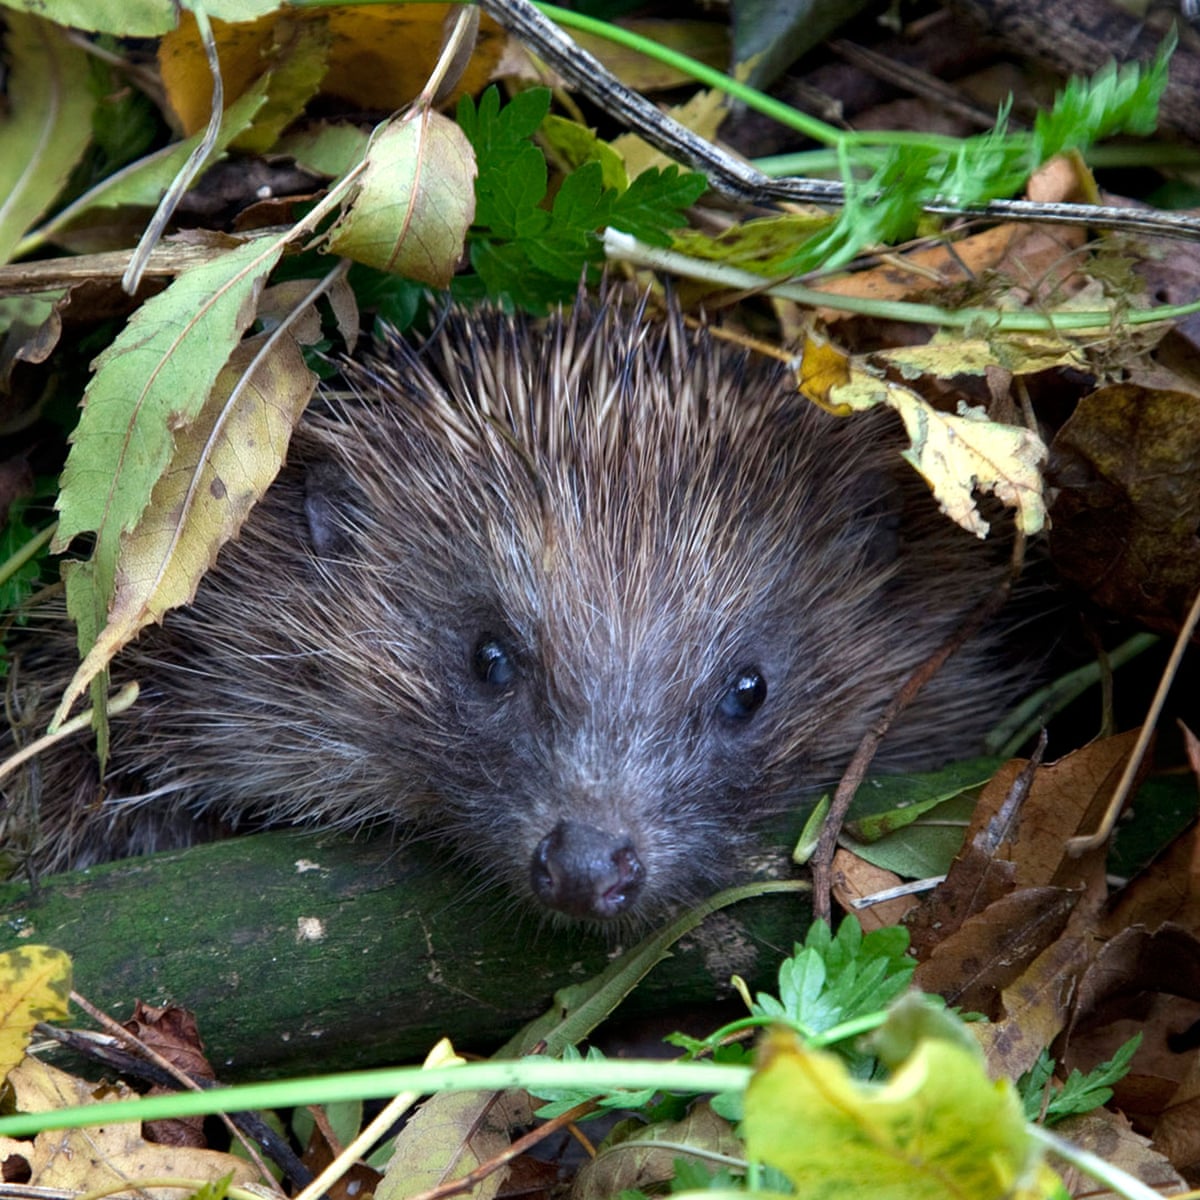 Next – a hedgehog snuffling! The lockdown lifeline capturing the sounds of  Britain | Culture | The Guardian